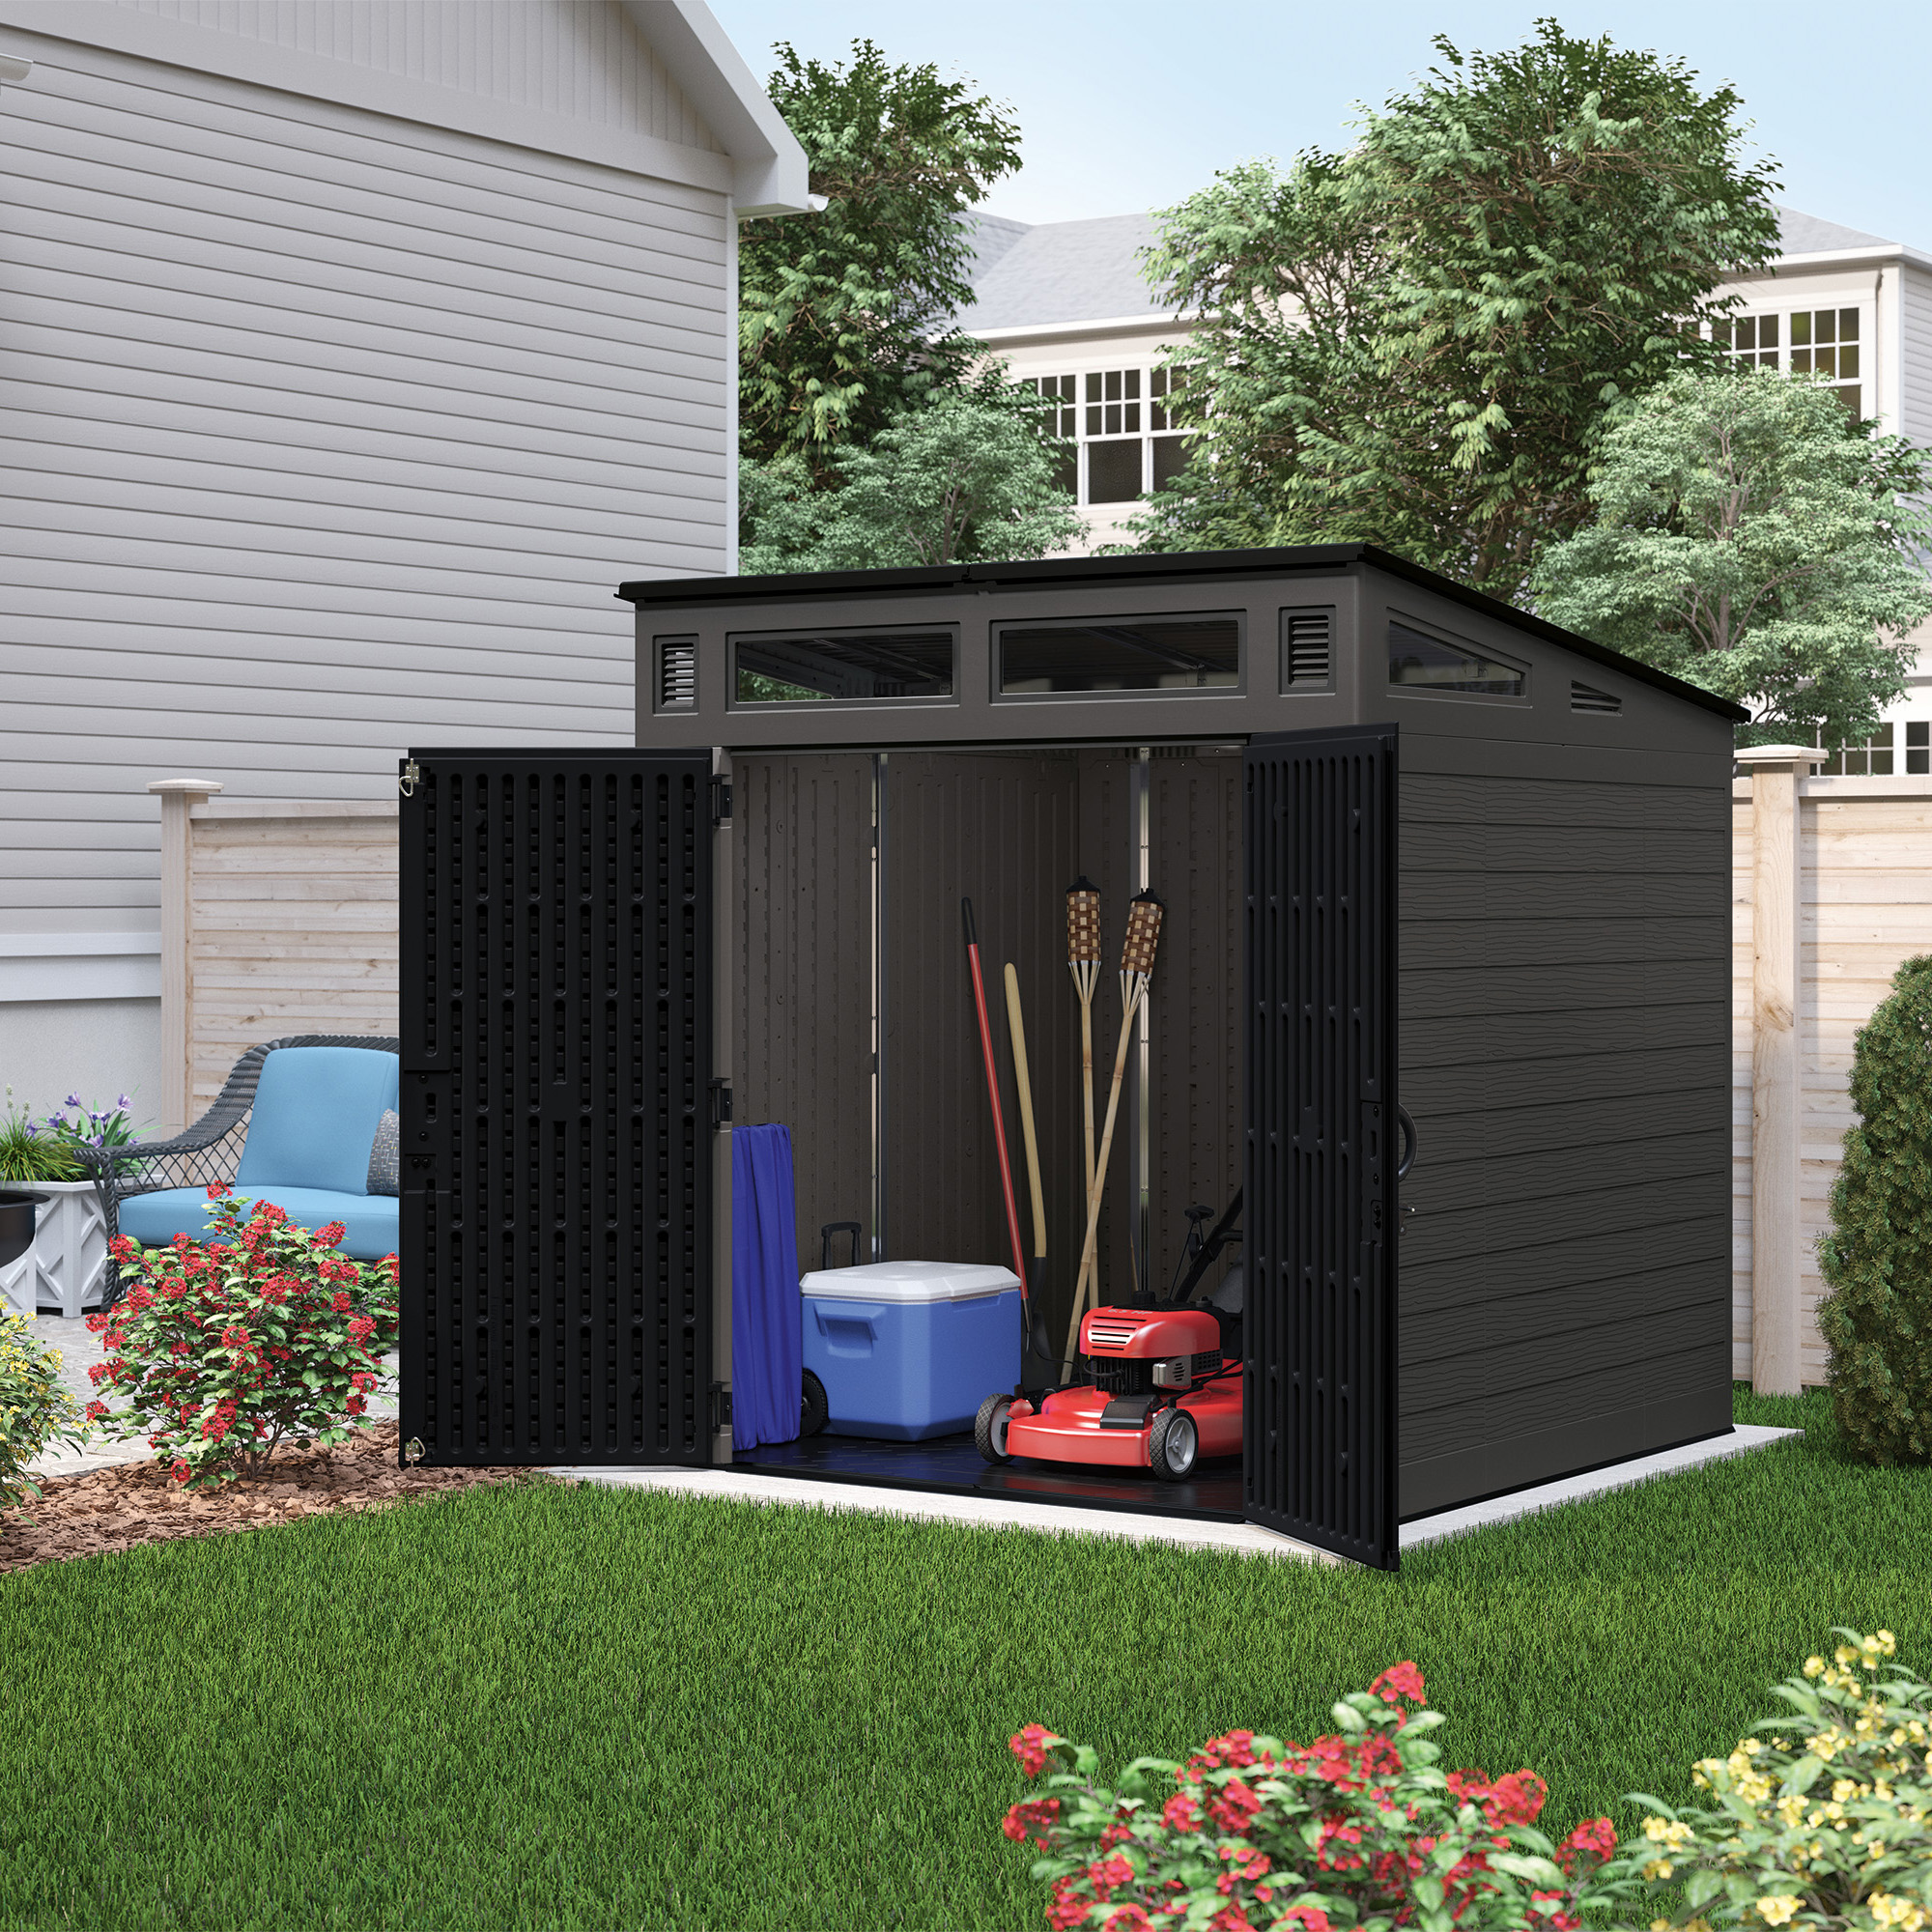 Suncast Resin Modernist Outdoor Storage Shed, Black and Gray, 86.5 in D x 89.5 in H x 87.5 in W - image 5 of 5